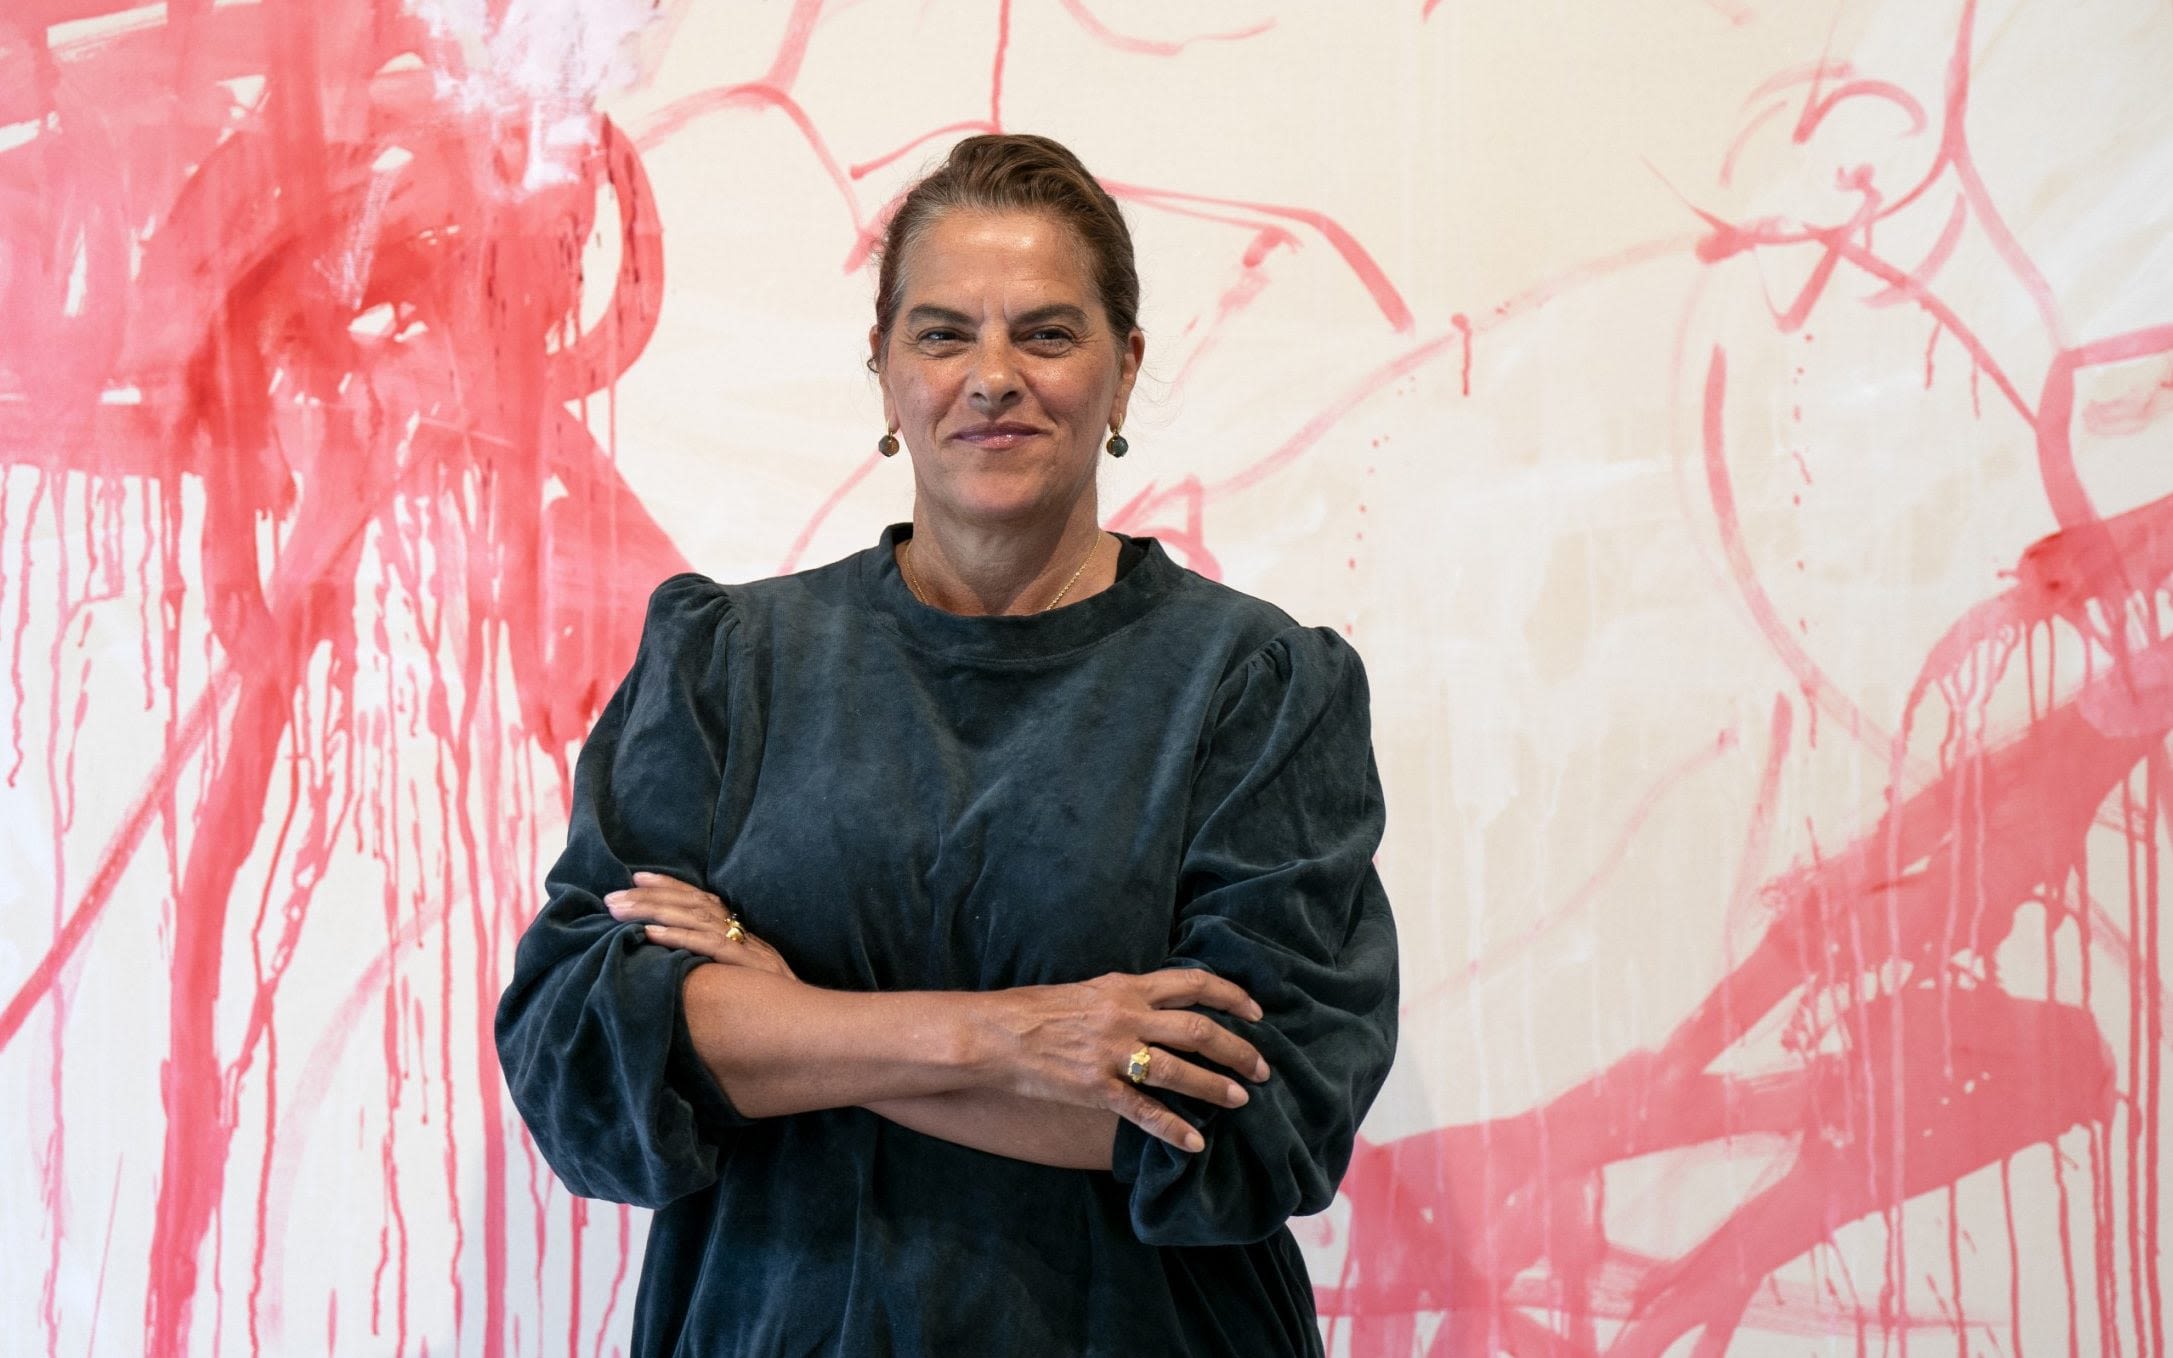 ‘Dame Tracey’ has a ring to it, says artist Emin after King’s Birthday Honours surprise